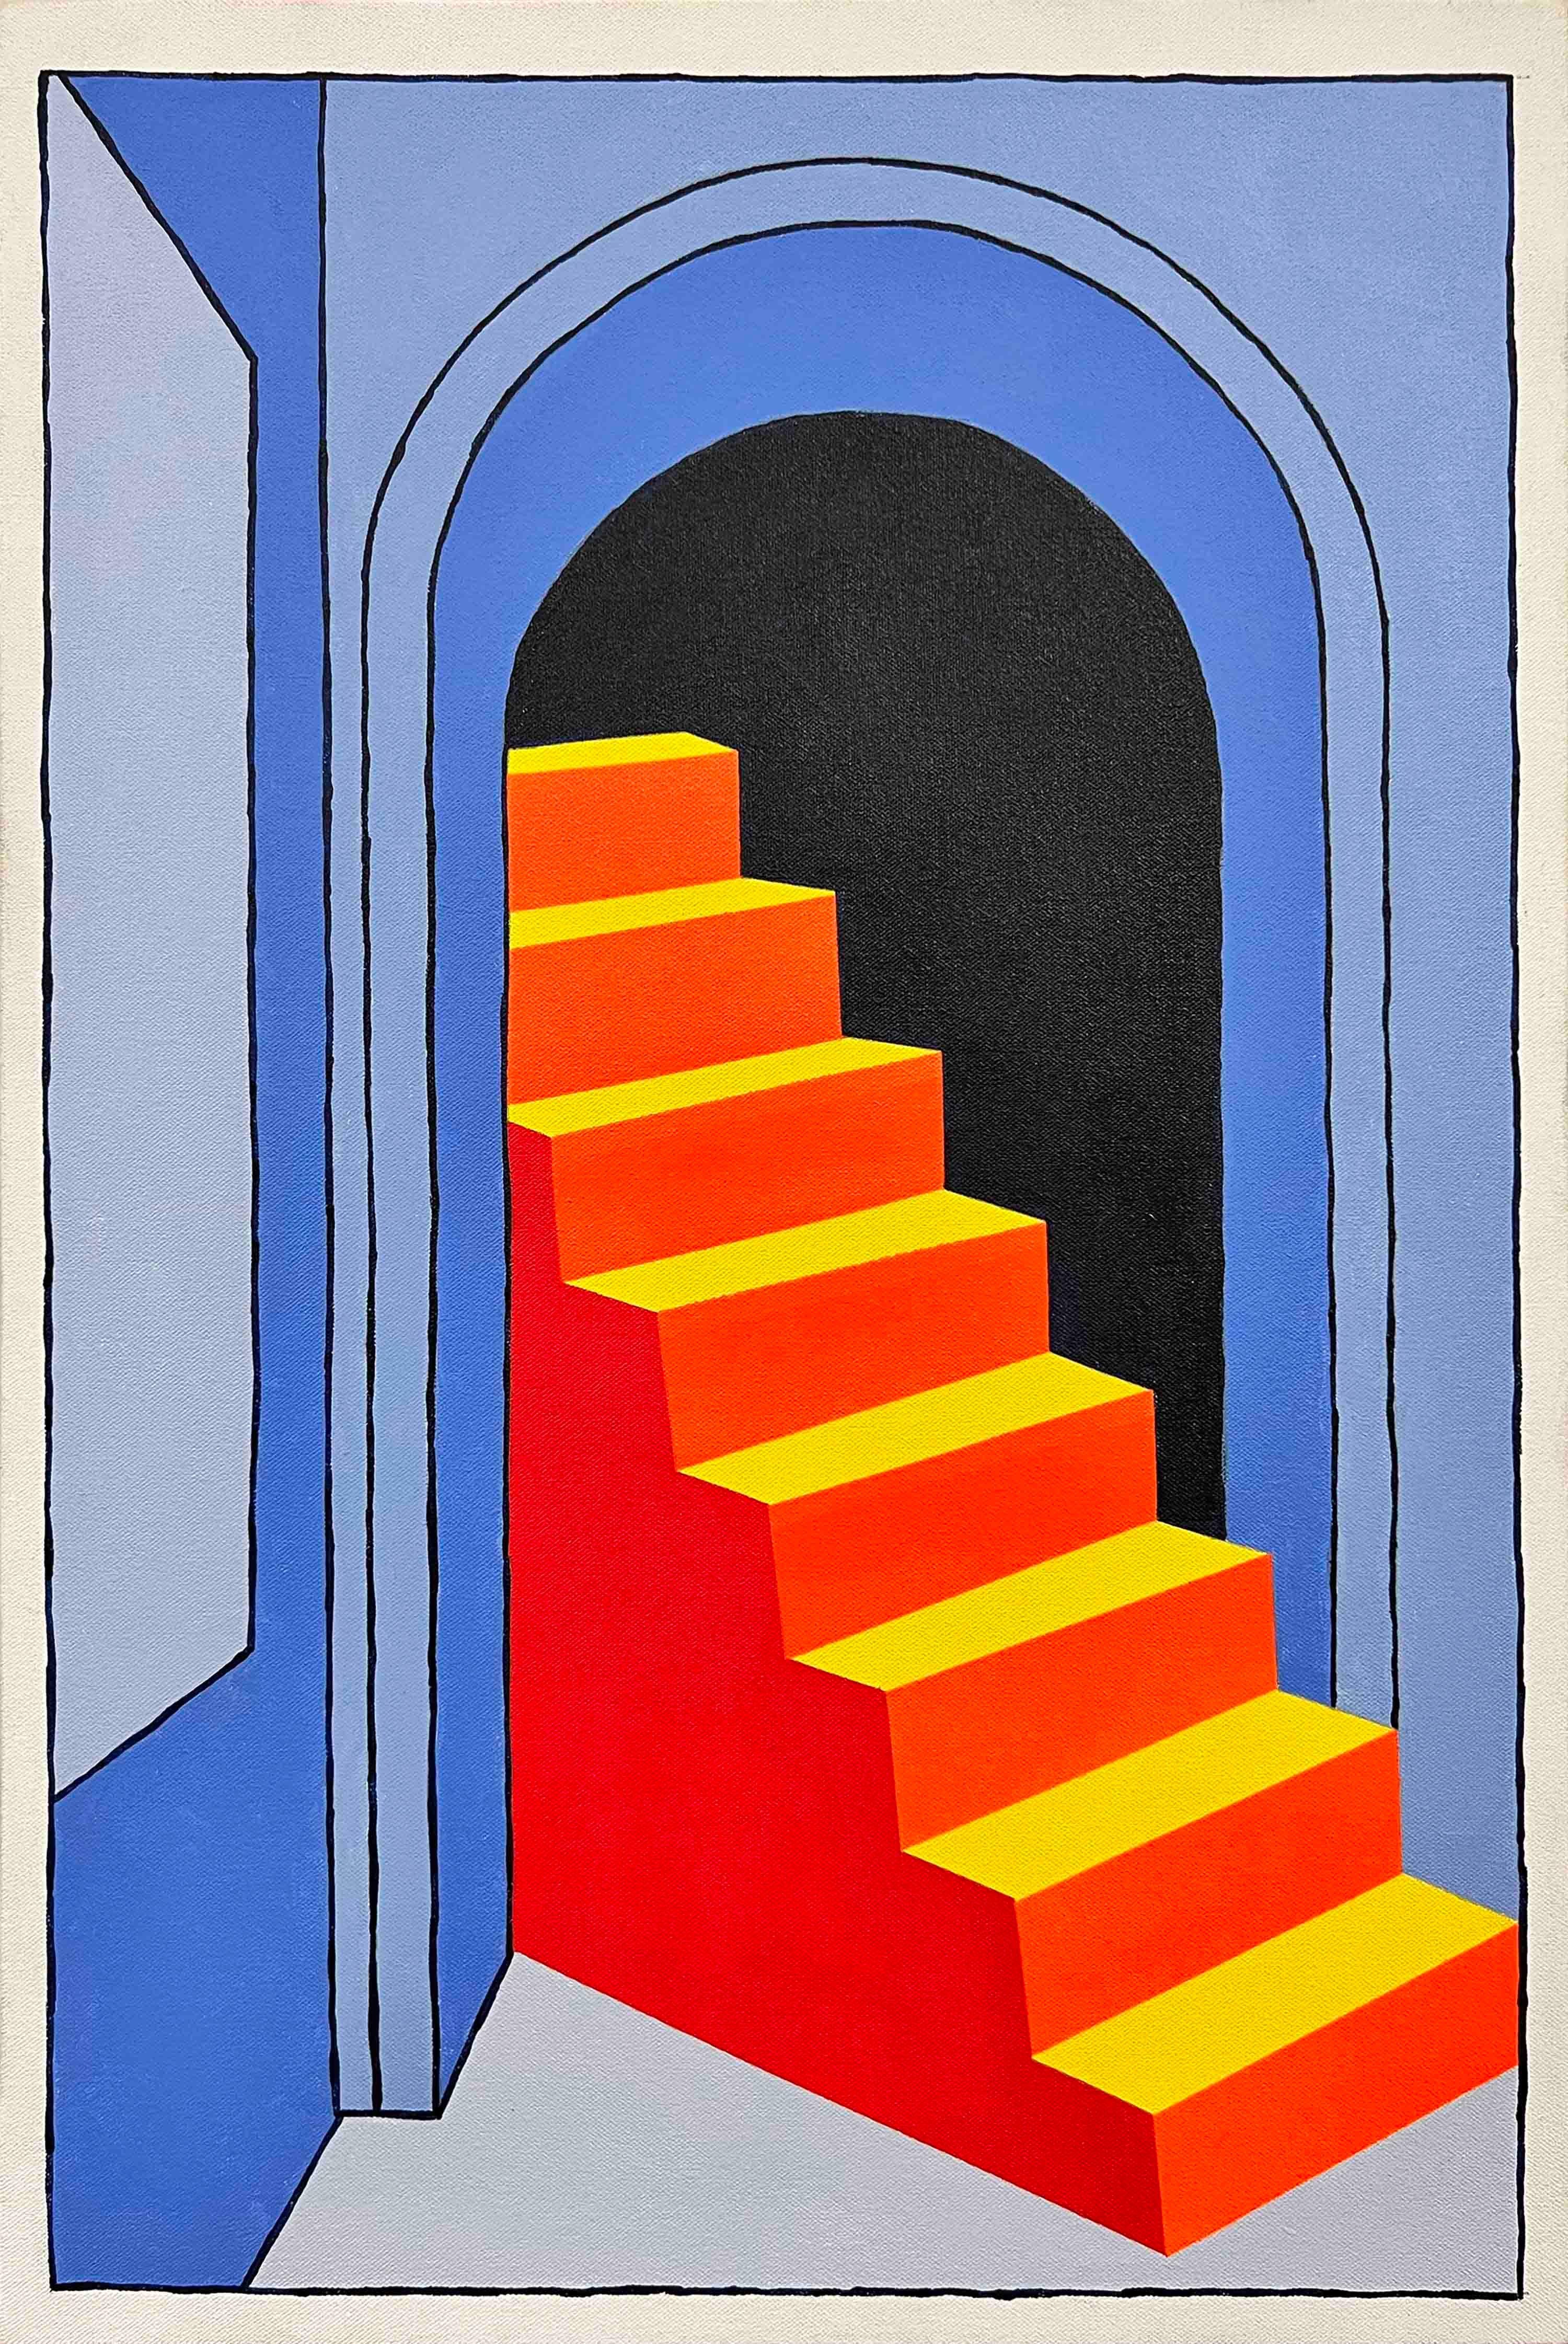 Chris Cascio Landscape Painting - "Untitled (Blue Hallway)" Contemporary Abstract Architectural Staircase Painting